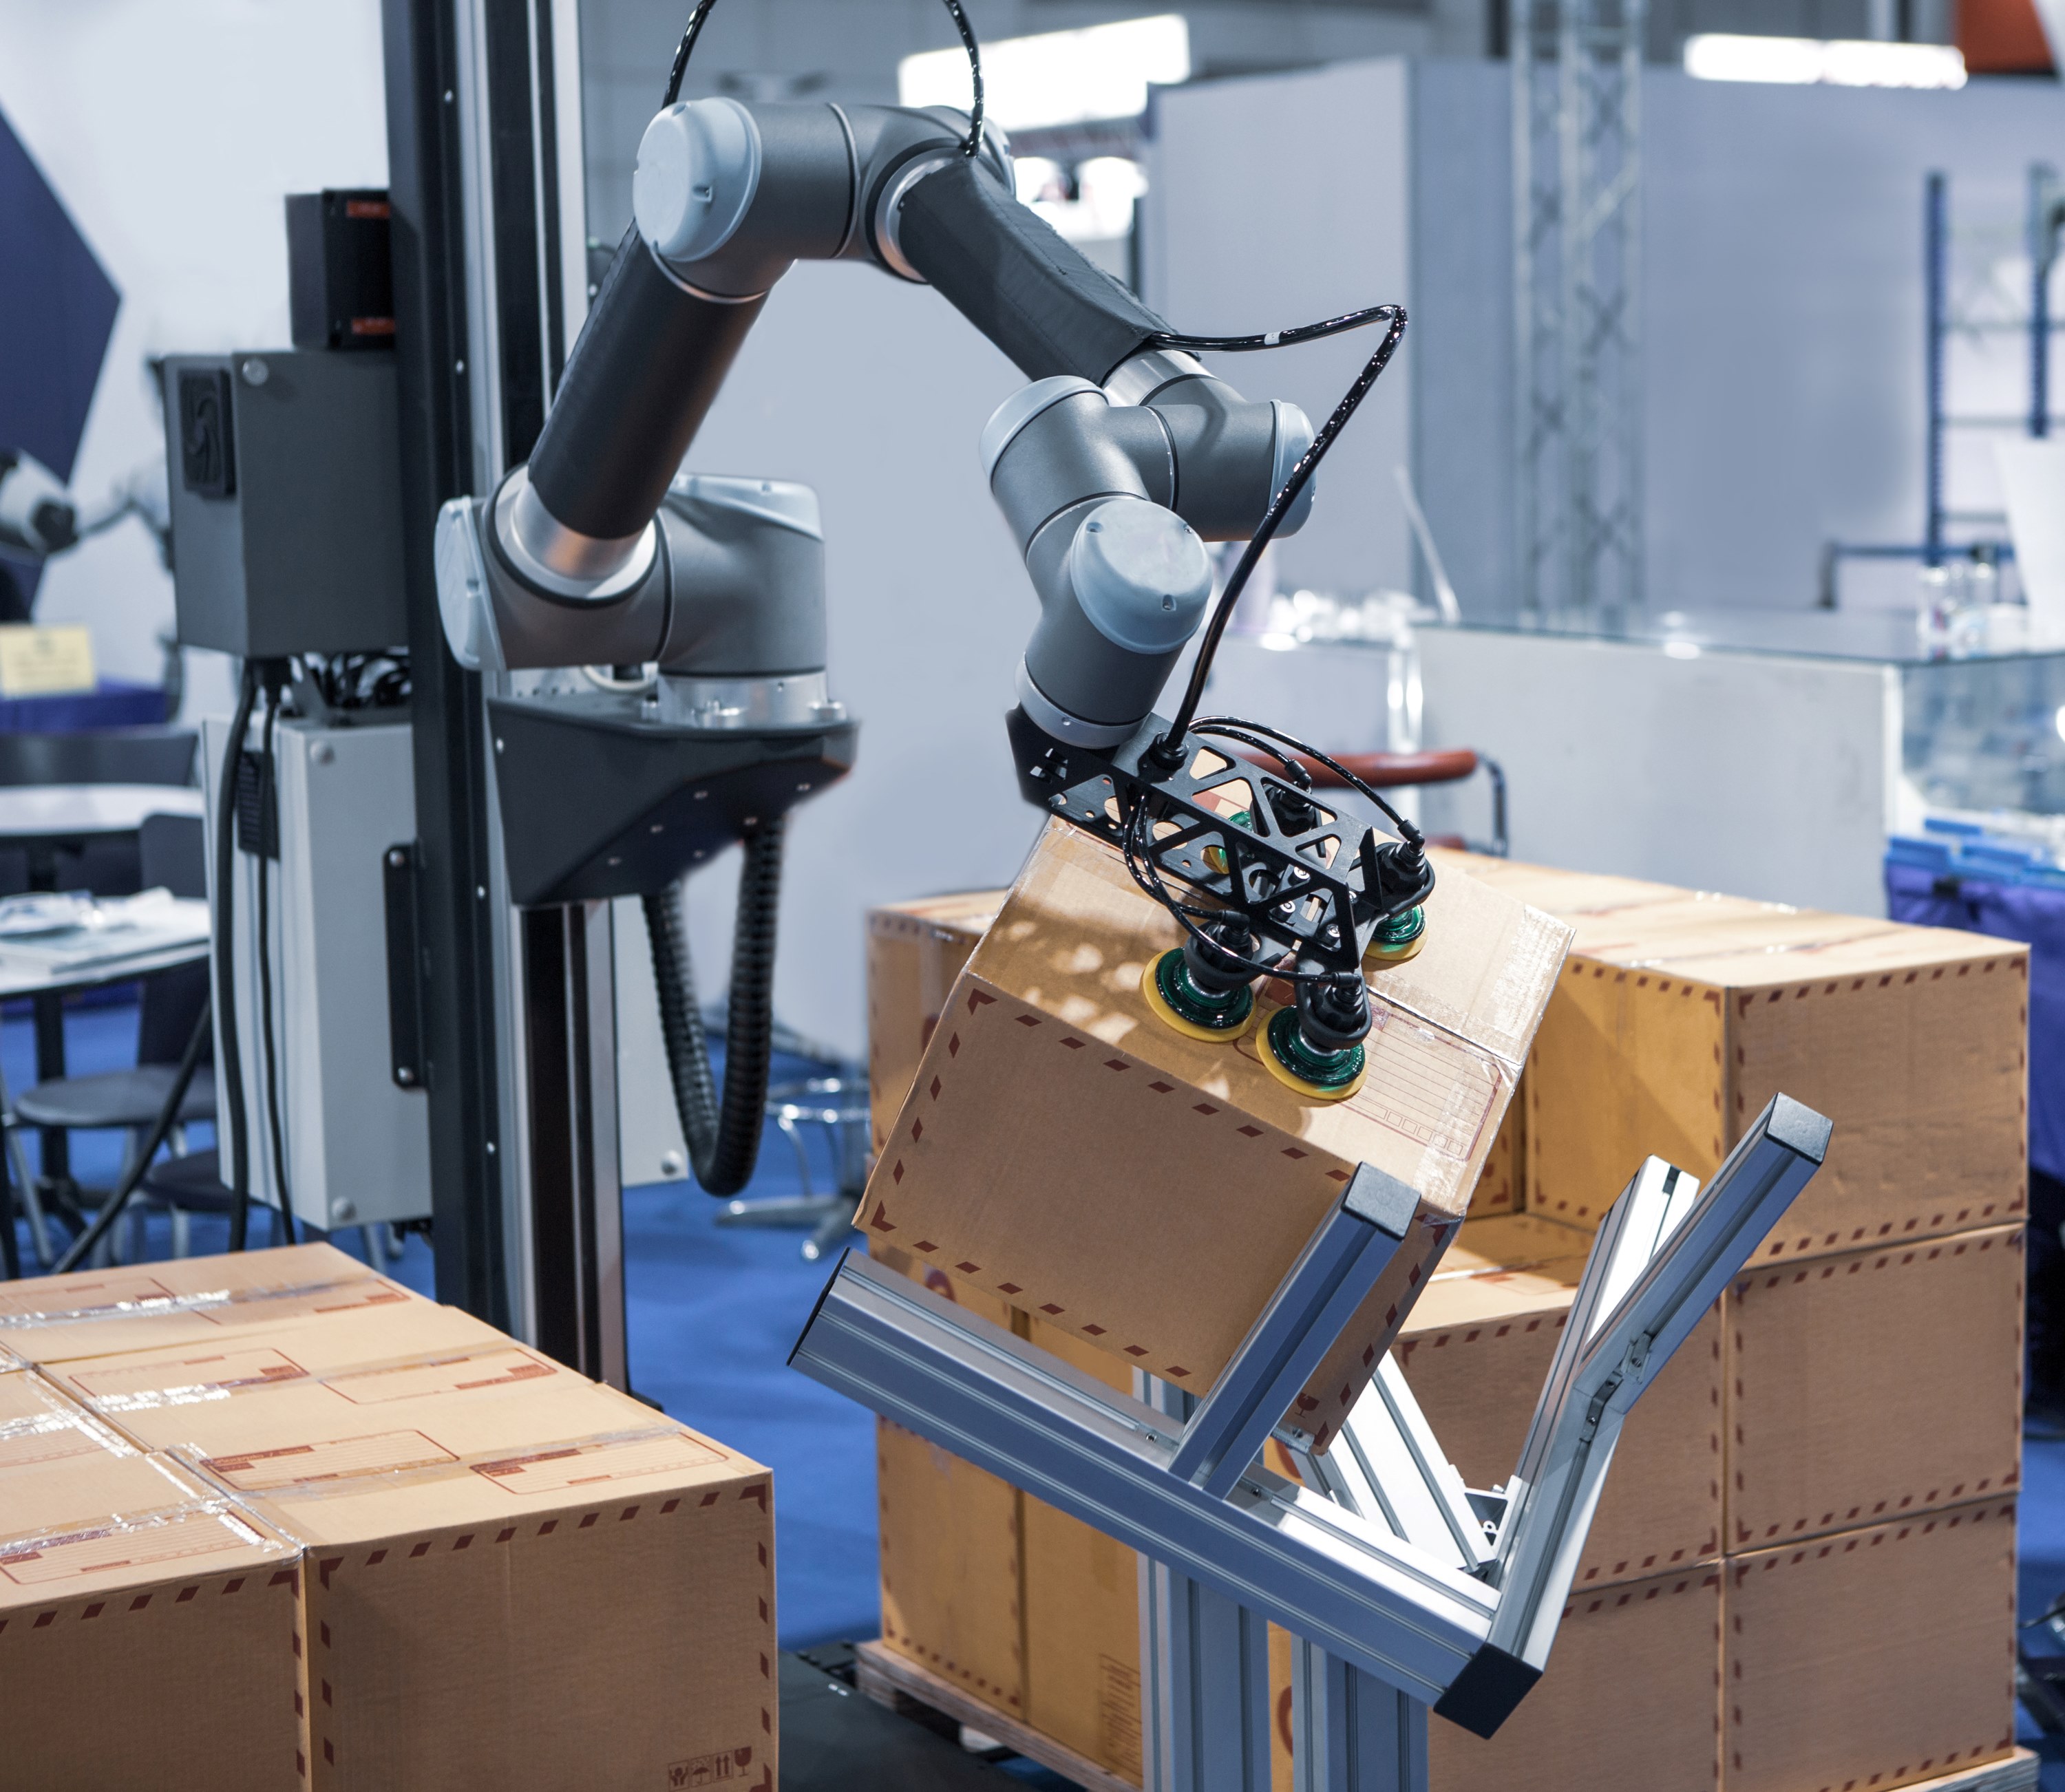 A Universal Robots cobot mounted on a vertical seventh axis picks a cardboard box from an offset fixture, to place on a pallet nearby.